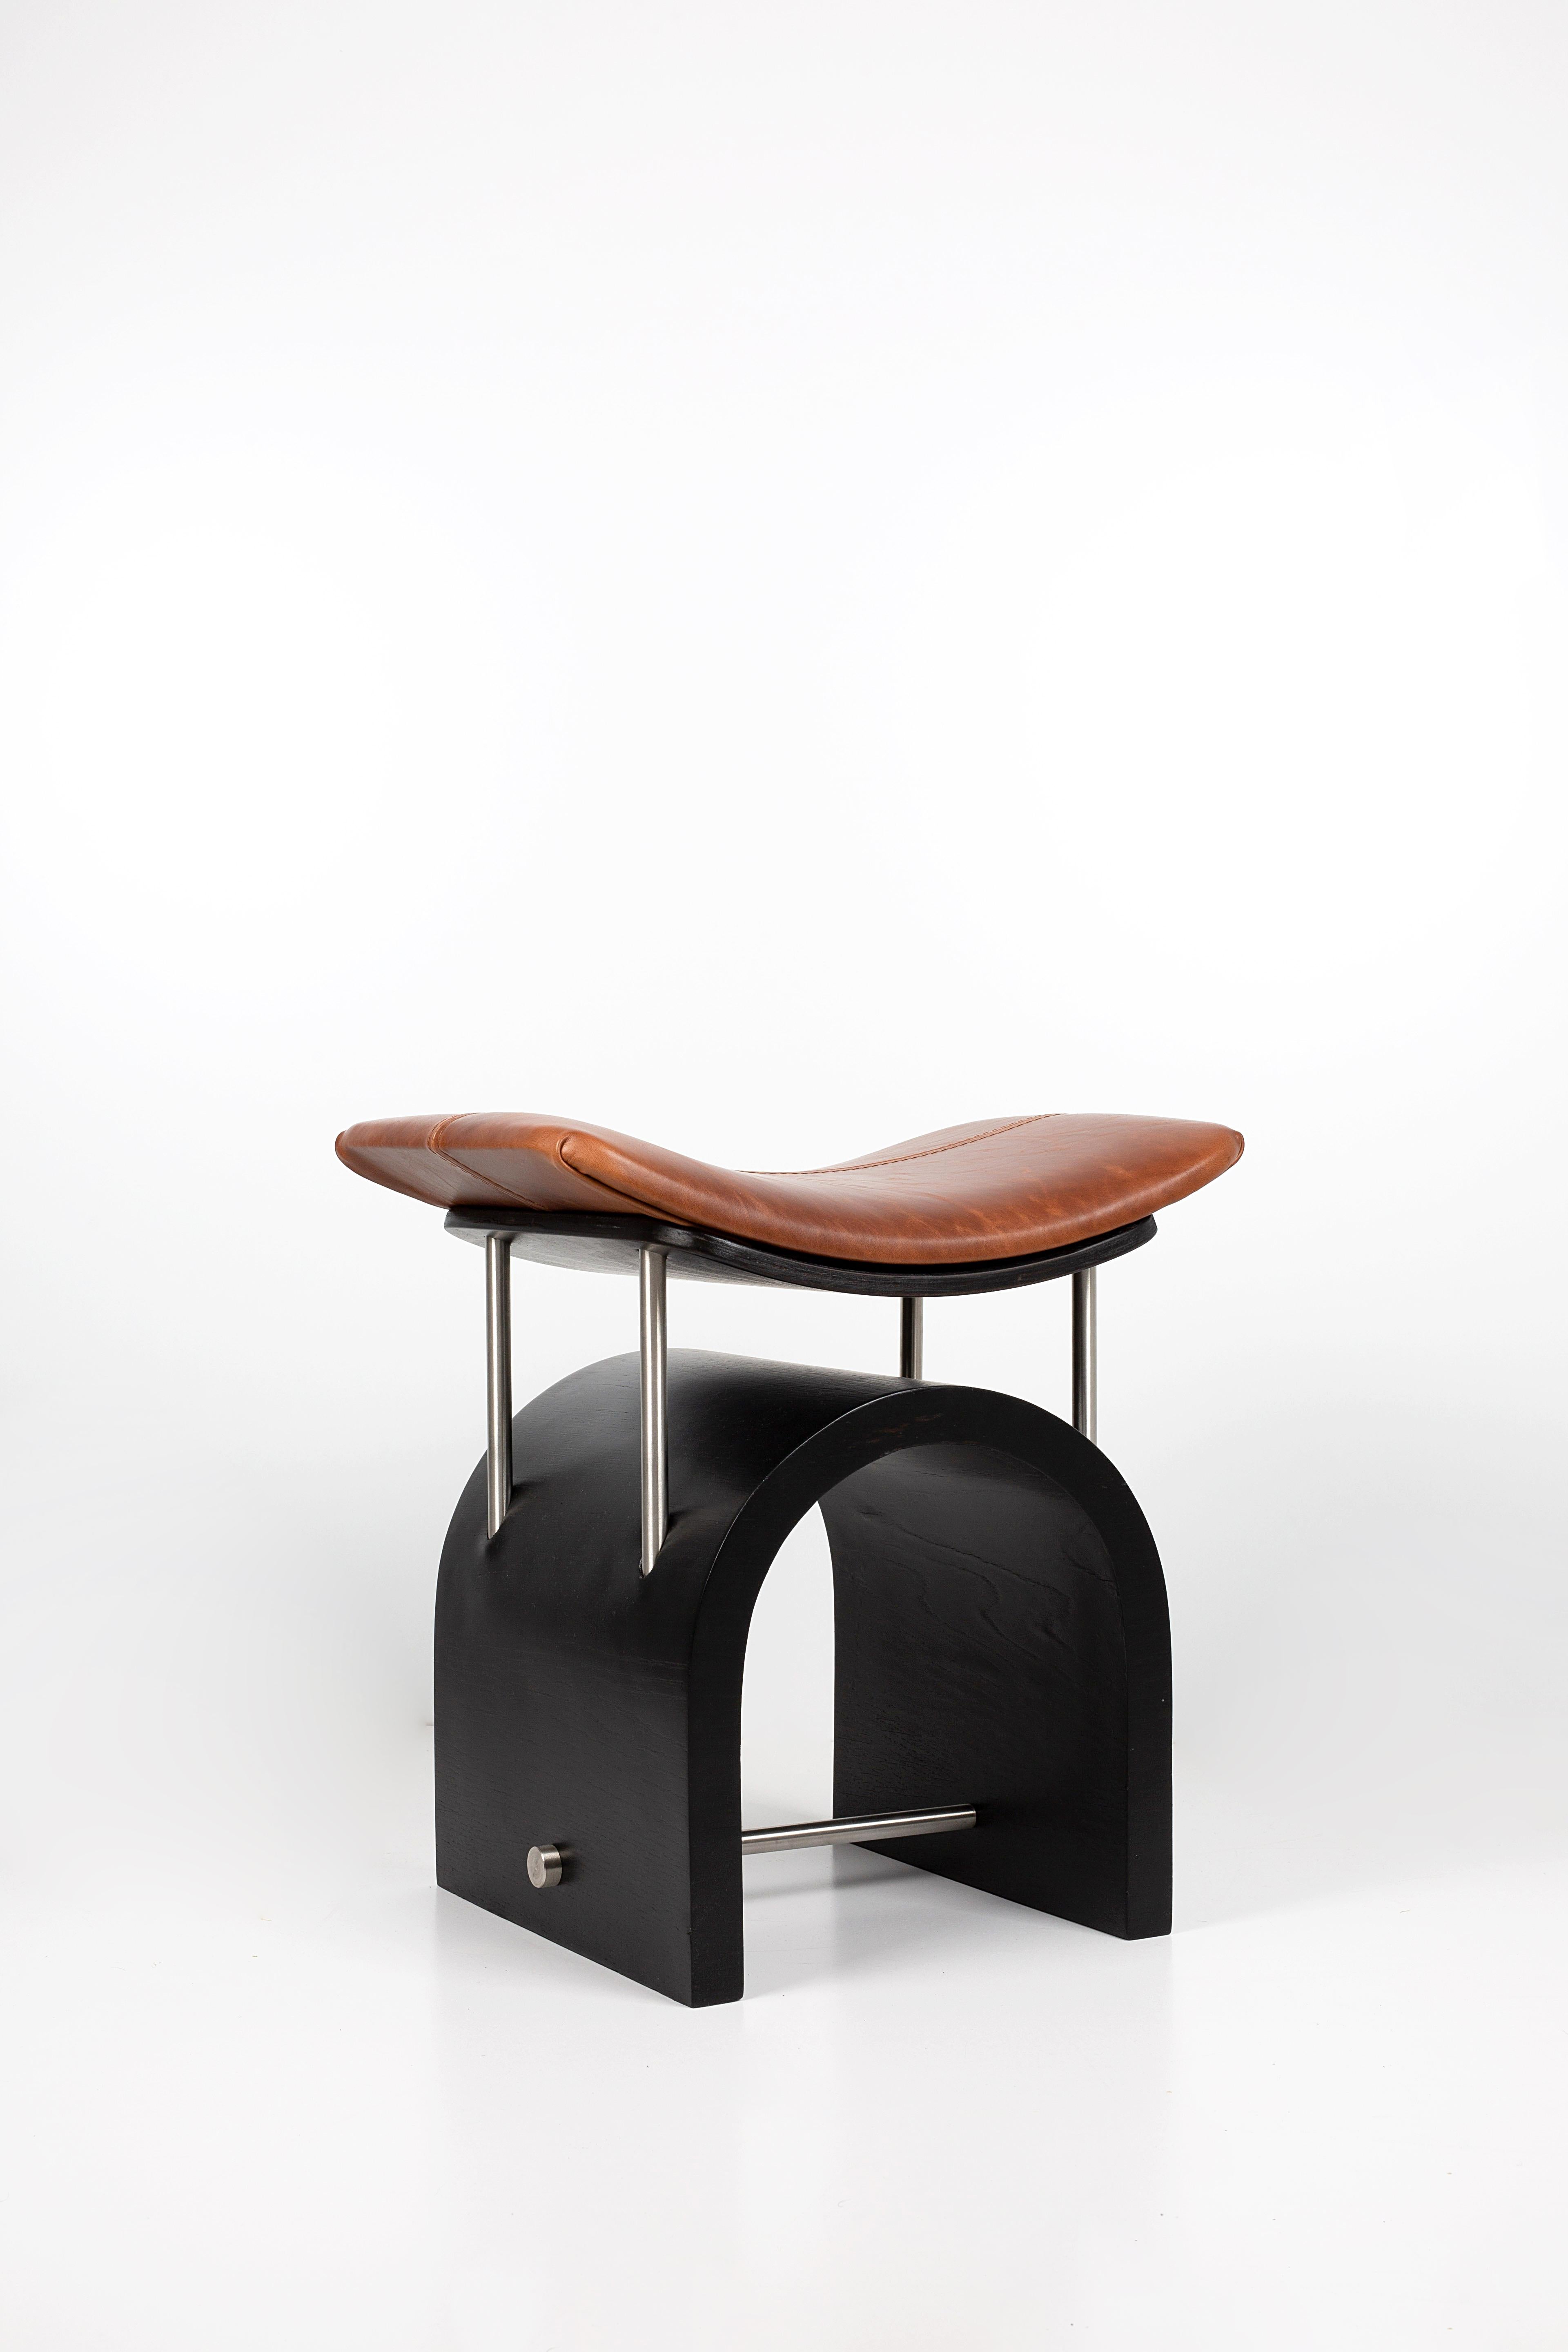 Black Leather Wing Stool by Studio Laf
Dimensions: L43 cm x W35 x H44 cm
Materials: Plywood, Stainless Steel, Leather
Structure: Black Plywood
Available: different colours Leather: Brown, Black, Antique Brown, Cherry Red.


It emerged with